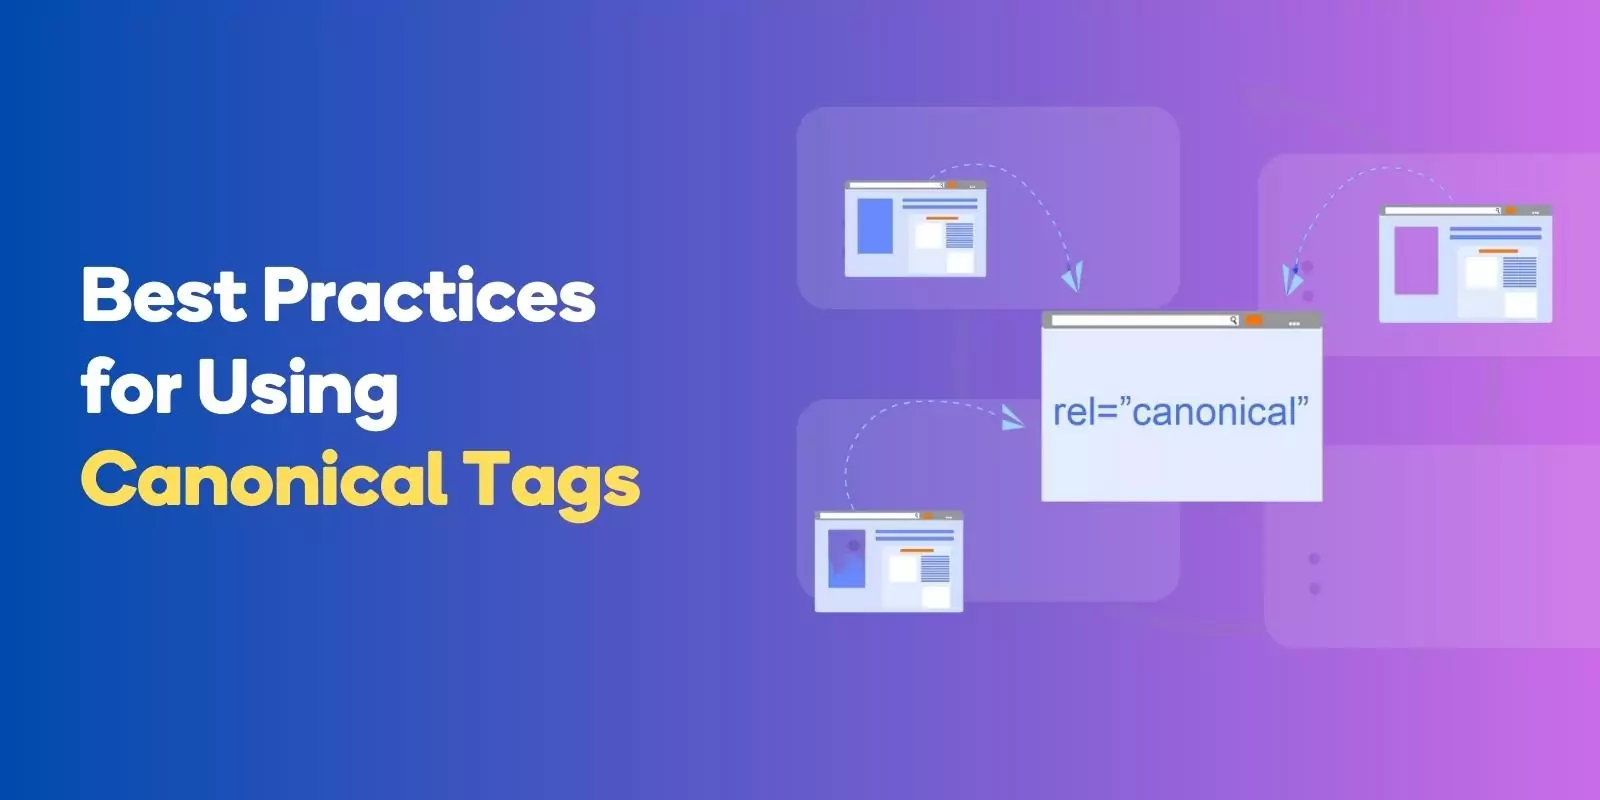 Best Practices for Using Canonical Tags